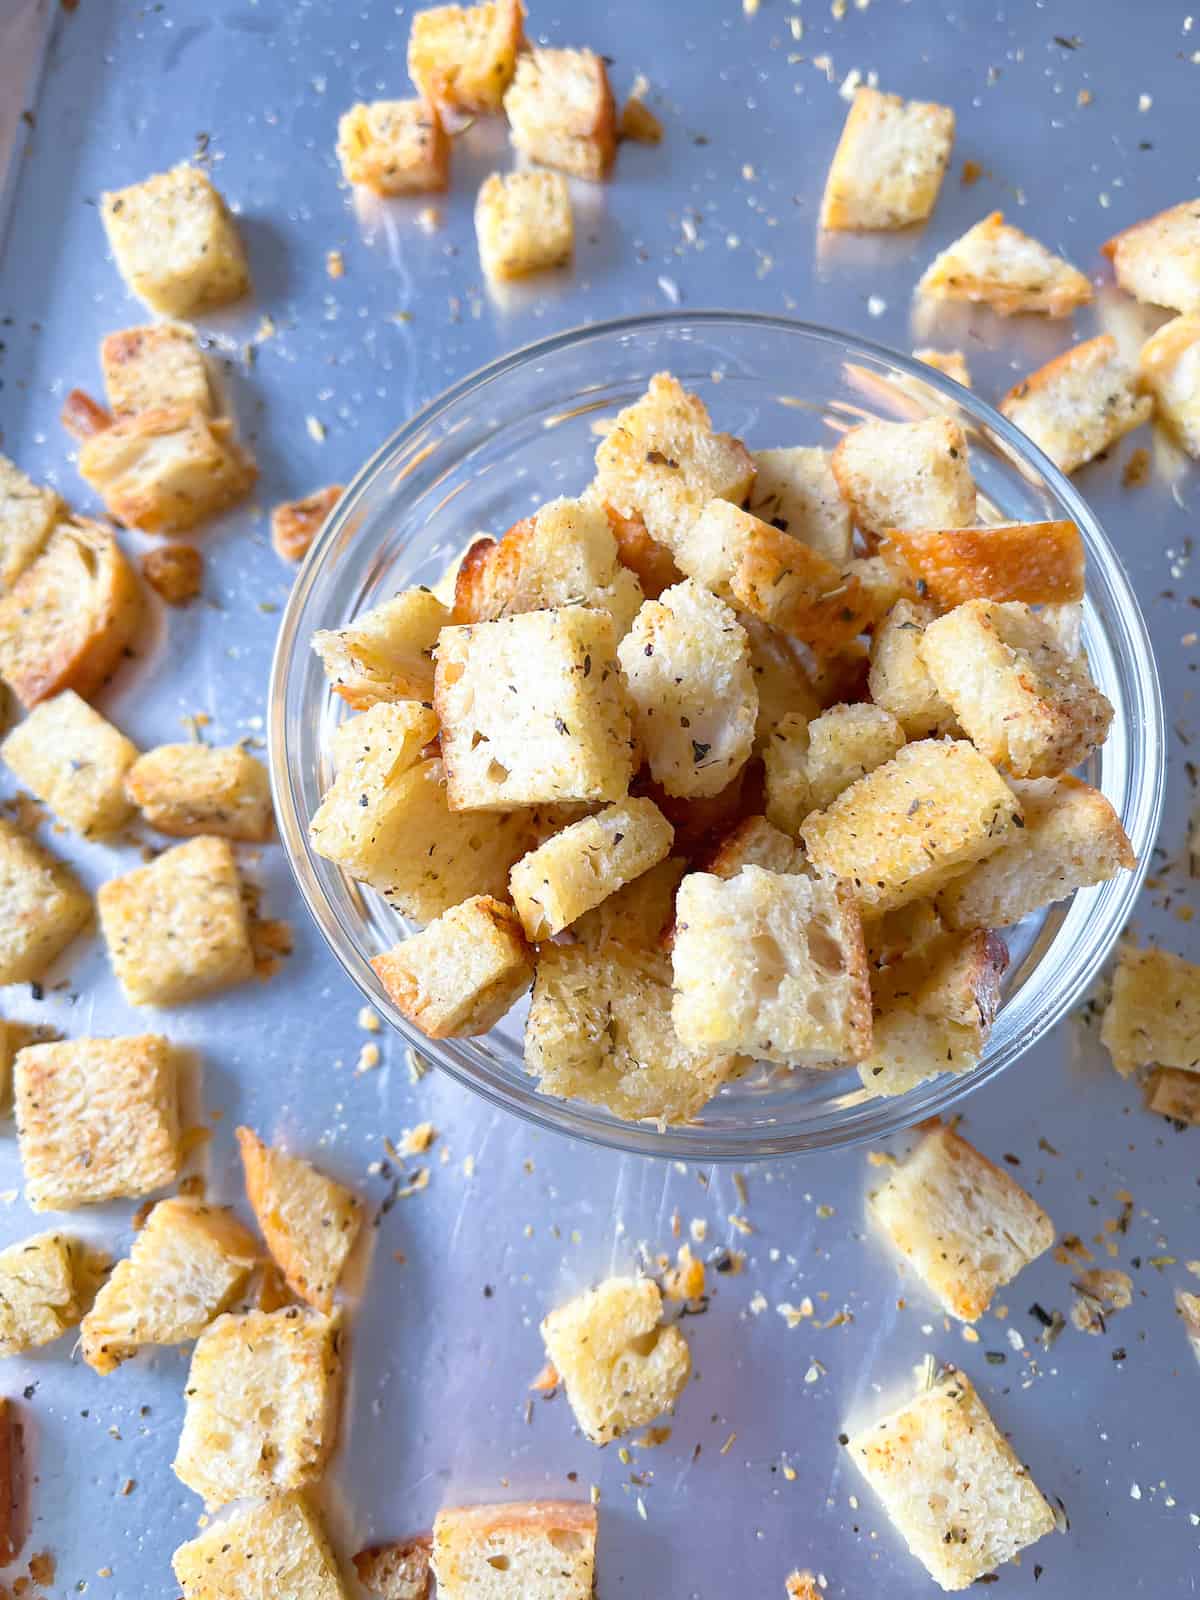 sourdough croutons in a glass bowl with more on a baking sheet in the background